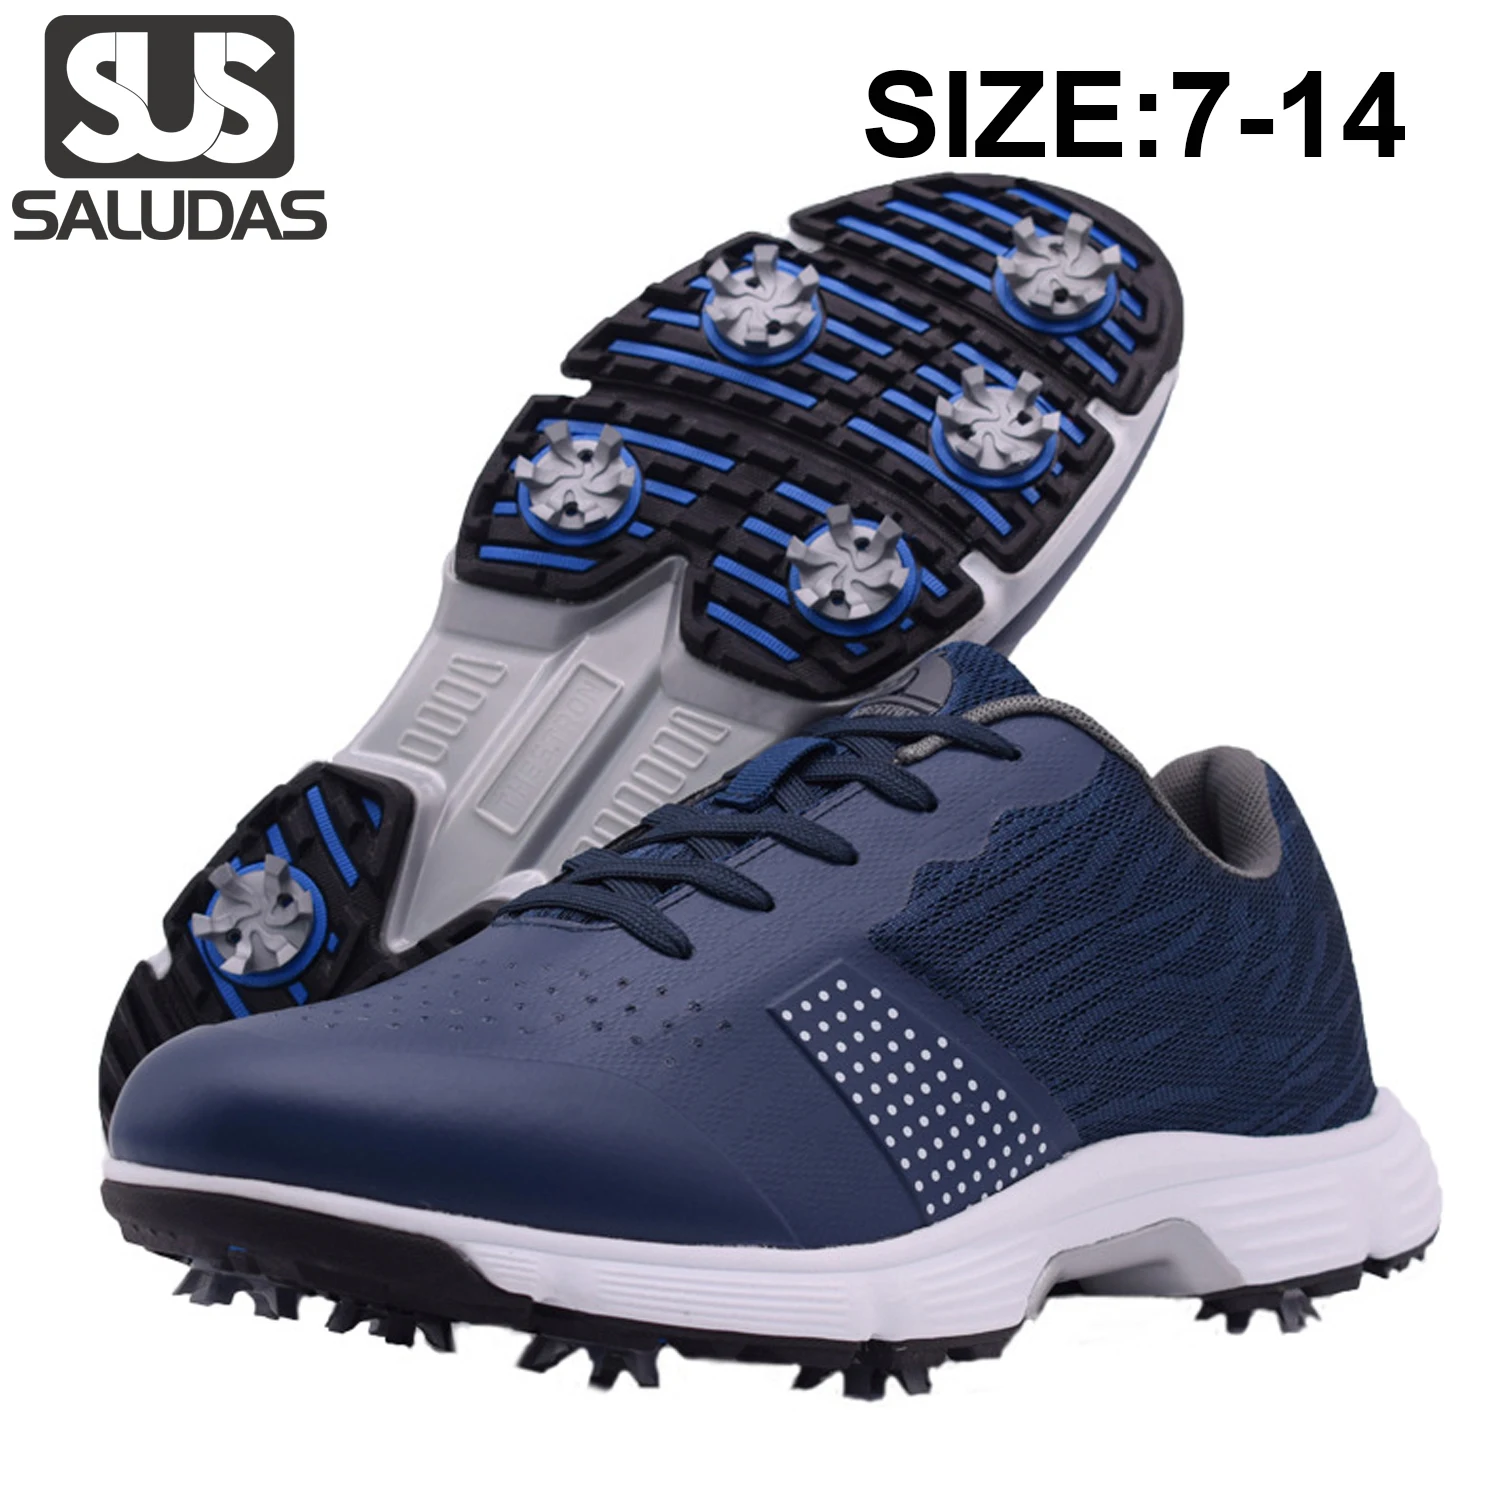 SALUDAS Golf Shoes for Men Waterproof Outdoor Sneakers Spikes Breathable Anti-slip Shoe Spikes Profession Men Golf Shoes